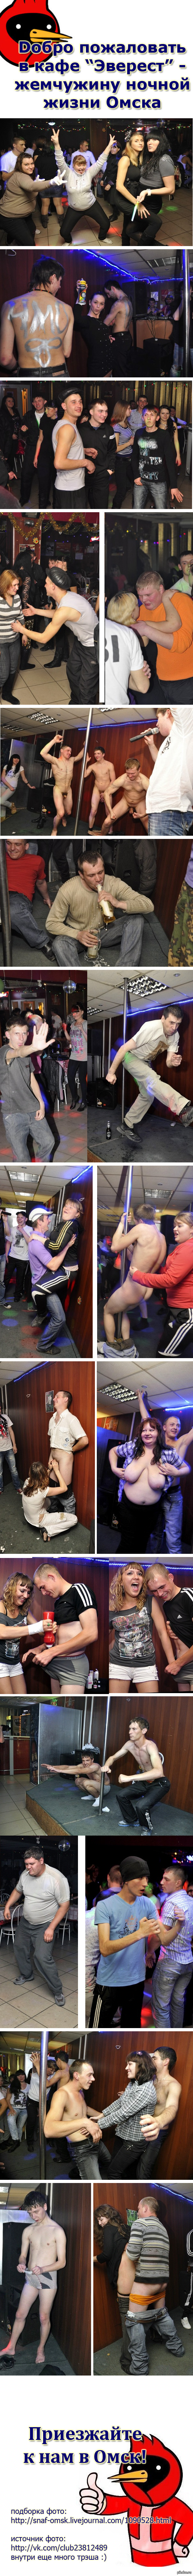 Acquaintance with the nightclubs of Omsk - NSFW, My, Omsk, Vodka, Boobs, Cattle, Gopniks, Alcoholics, Alcohol